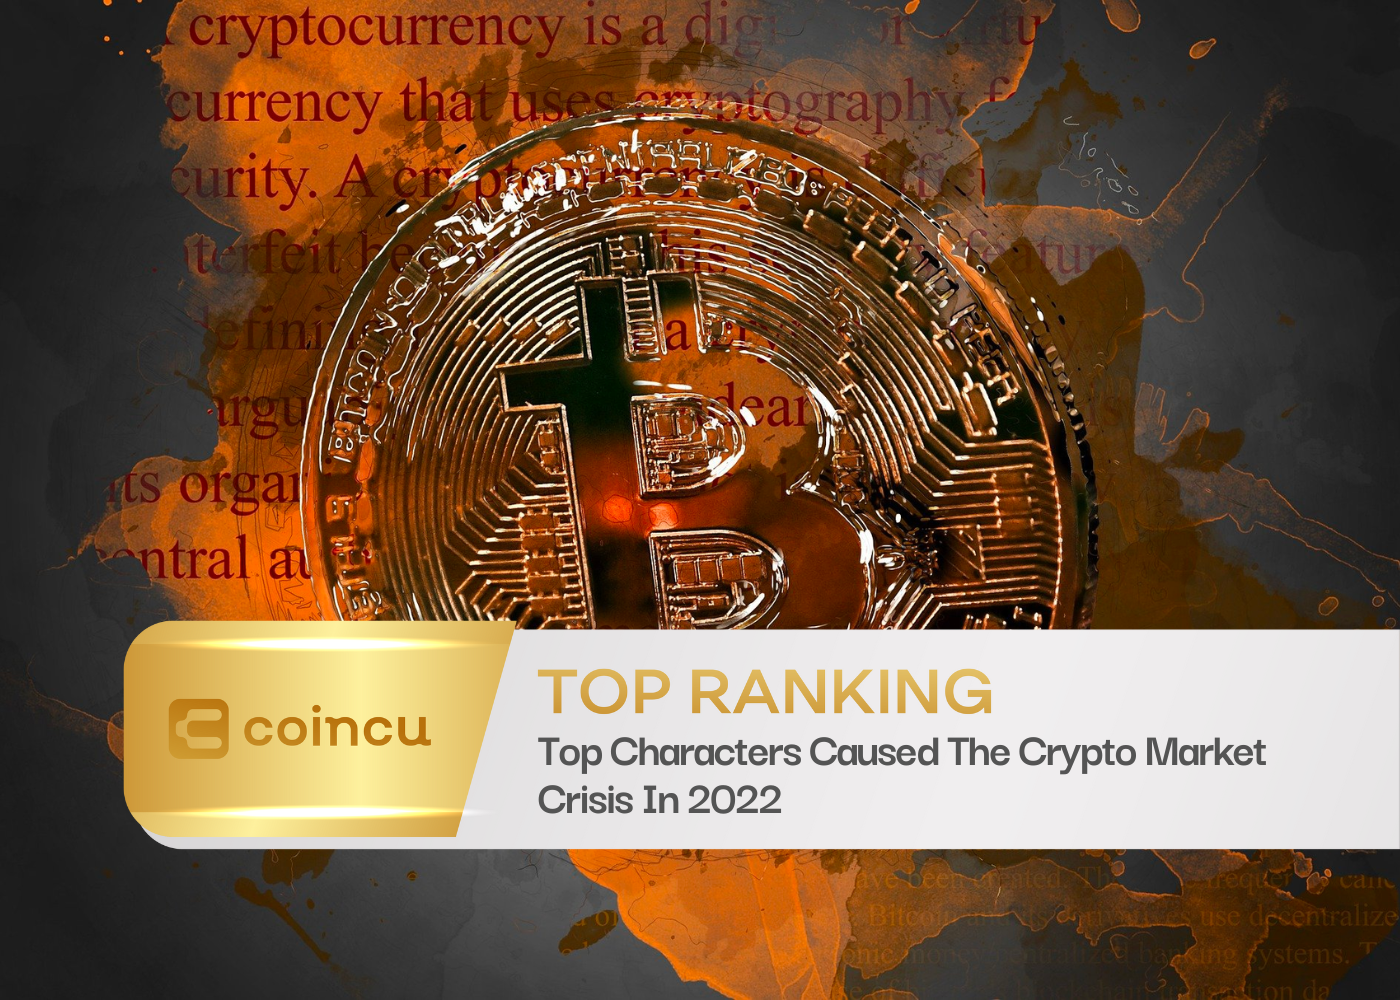 Top Characters Caused The Crypto Market Crisis In 2022